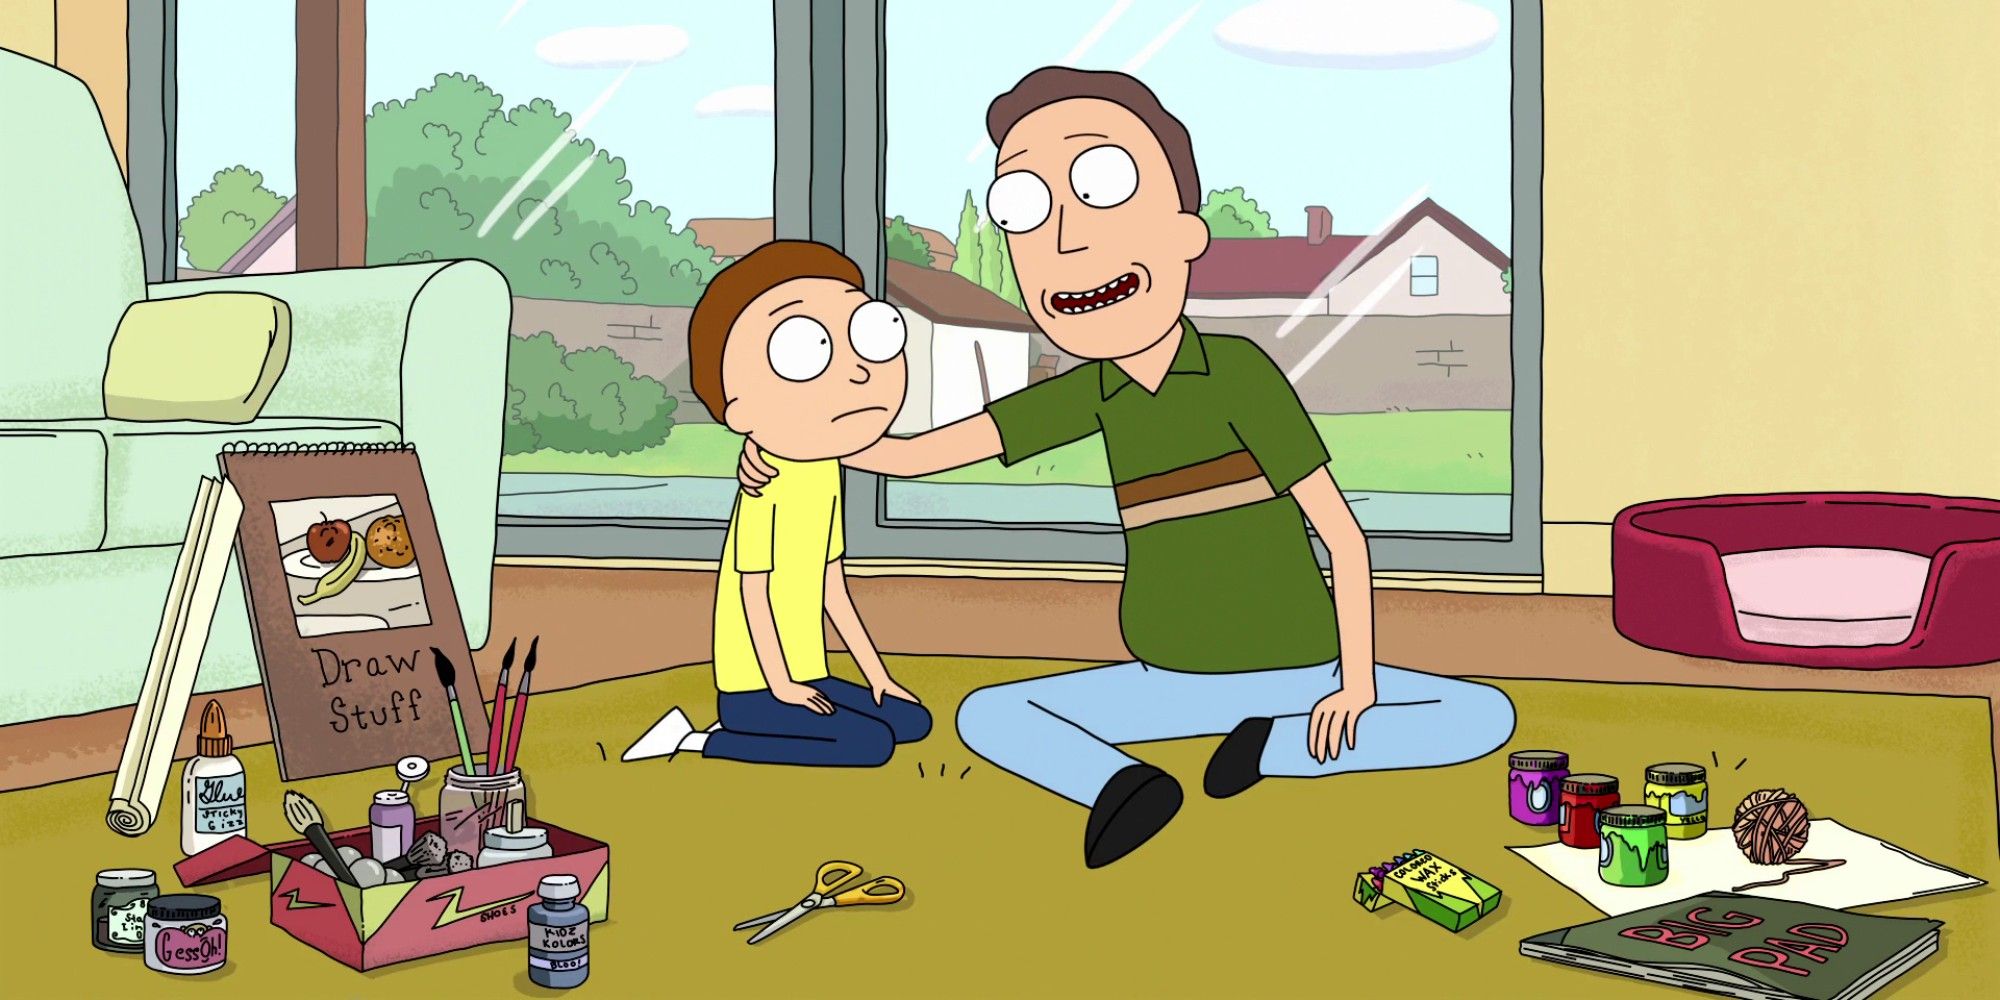 jerry parenting morty in rick and morty